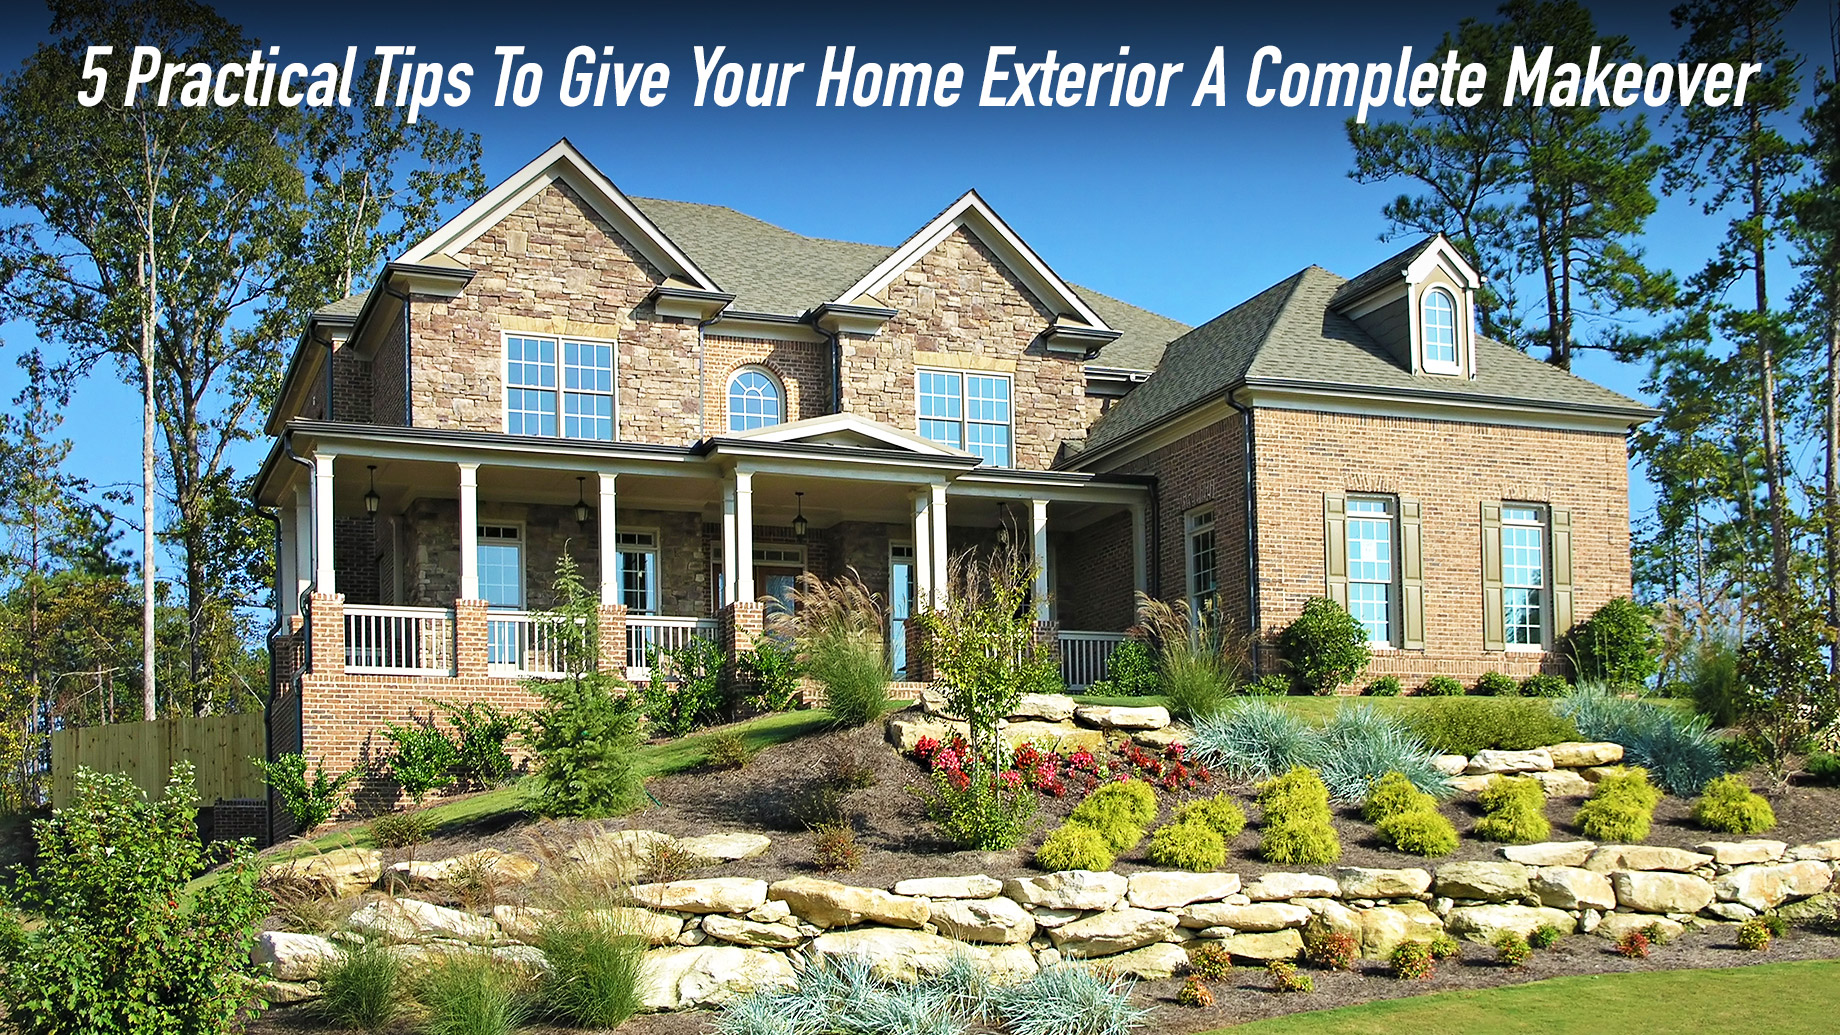 5 Practical Tips To Give Your Home Exterior A Complete Makeover